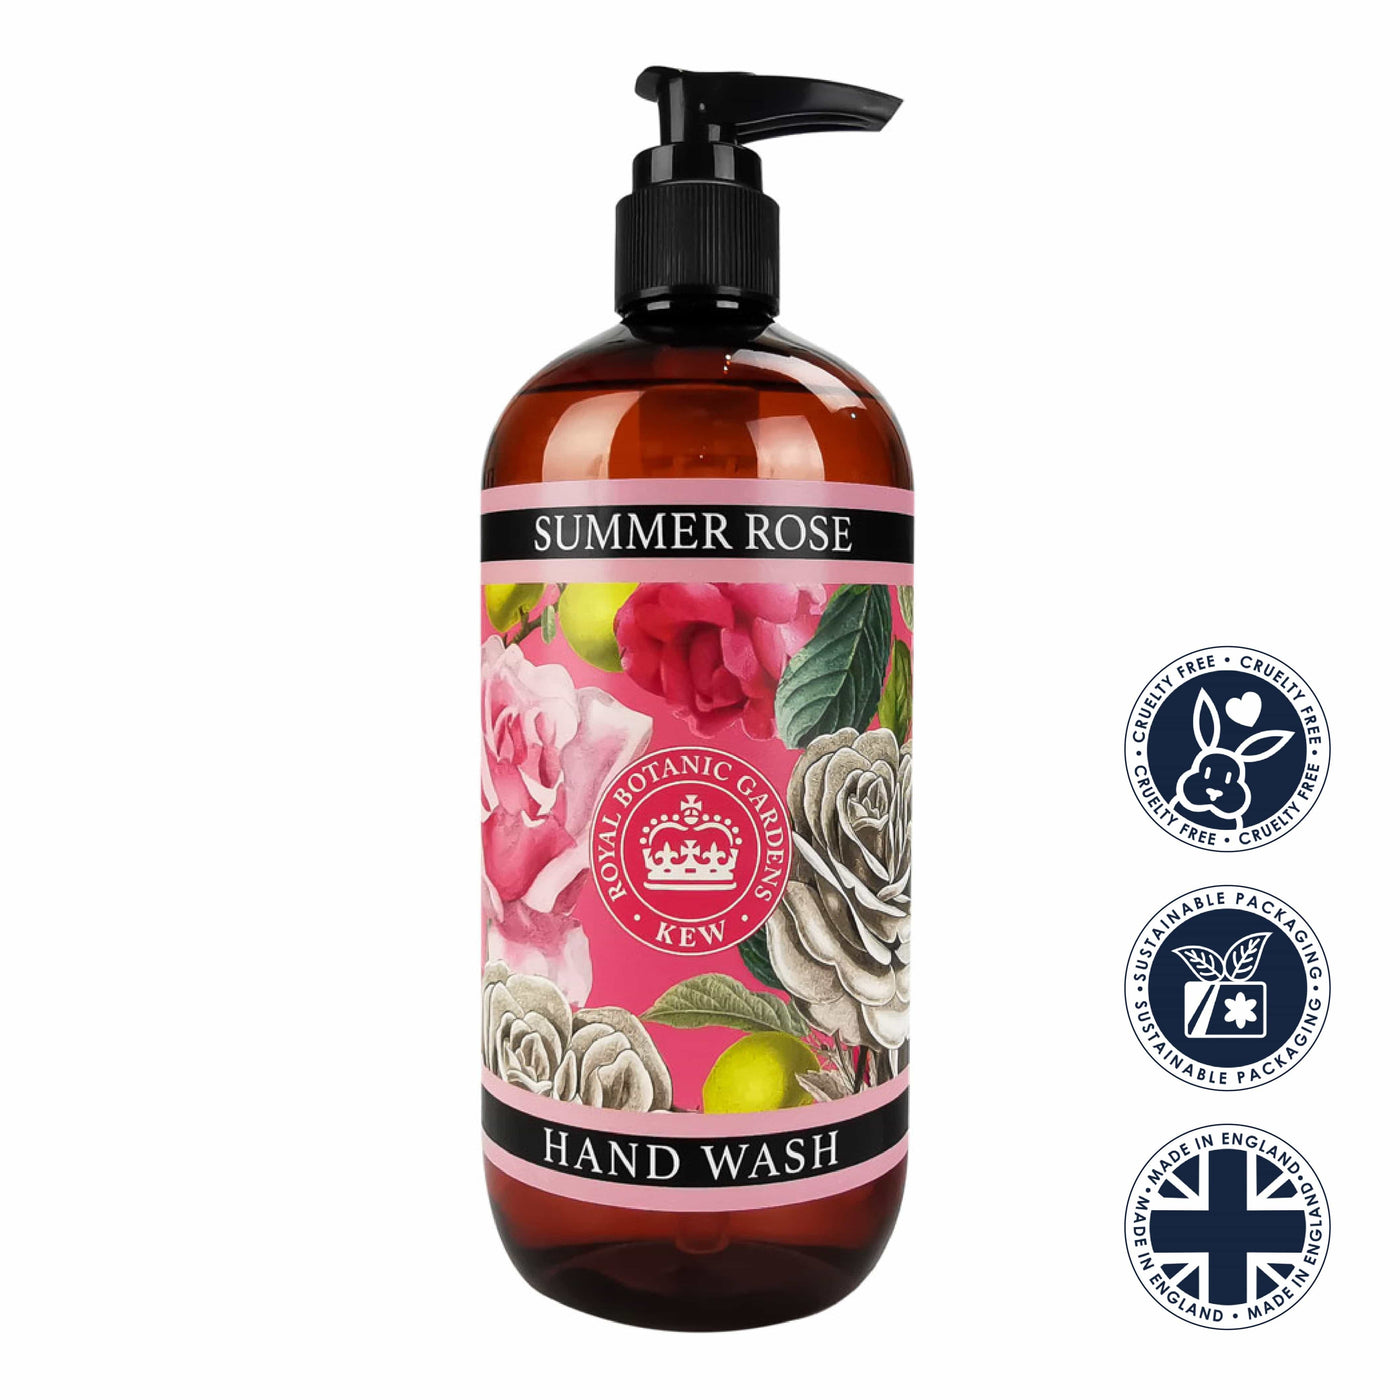 Summer Rose Hand Wash - Kew Gardens Collection from our Liquid Hand & Body Soap collection by The English Soap Company